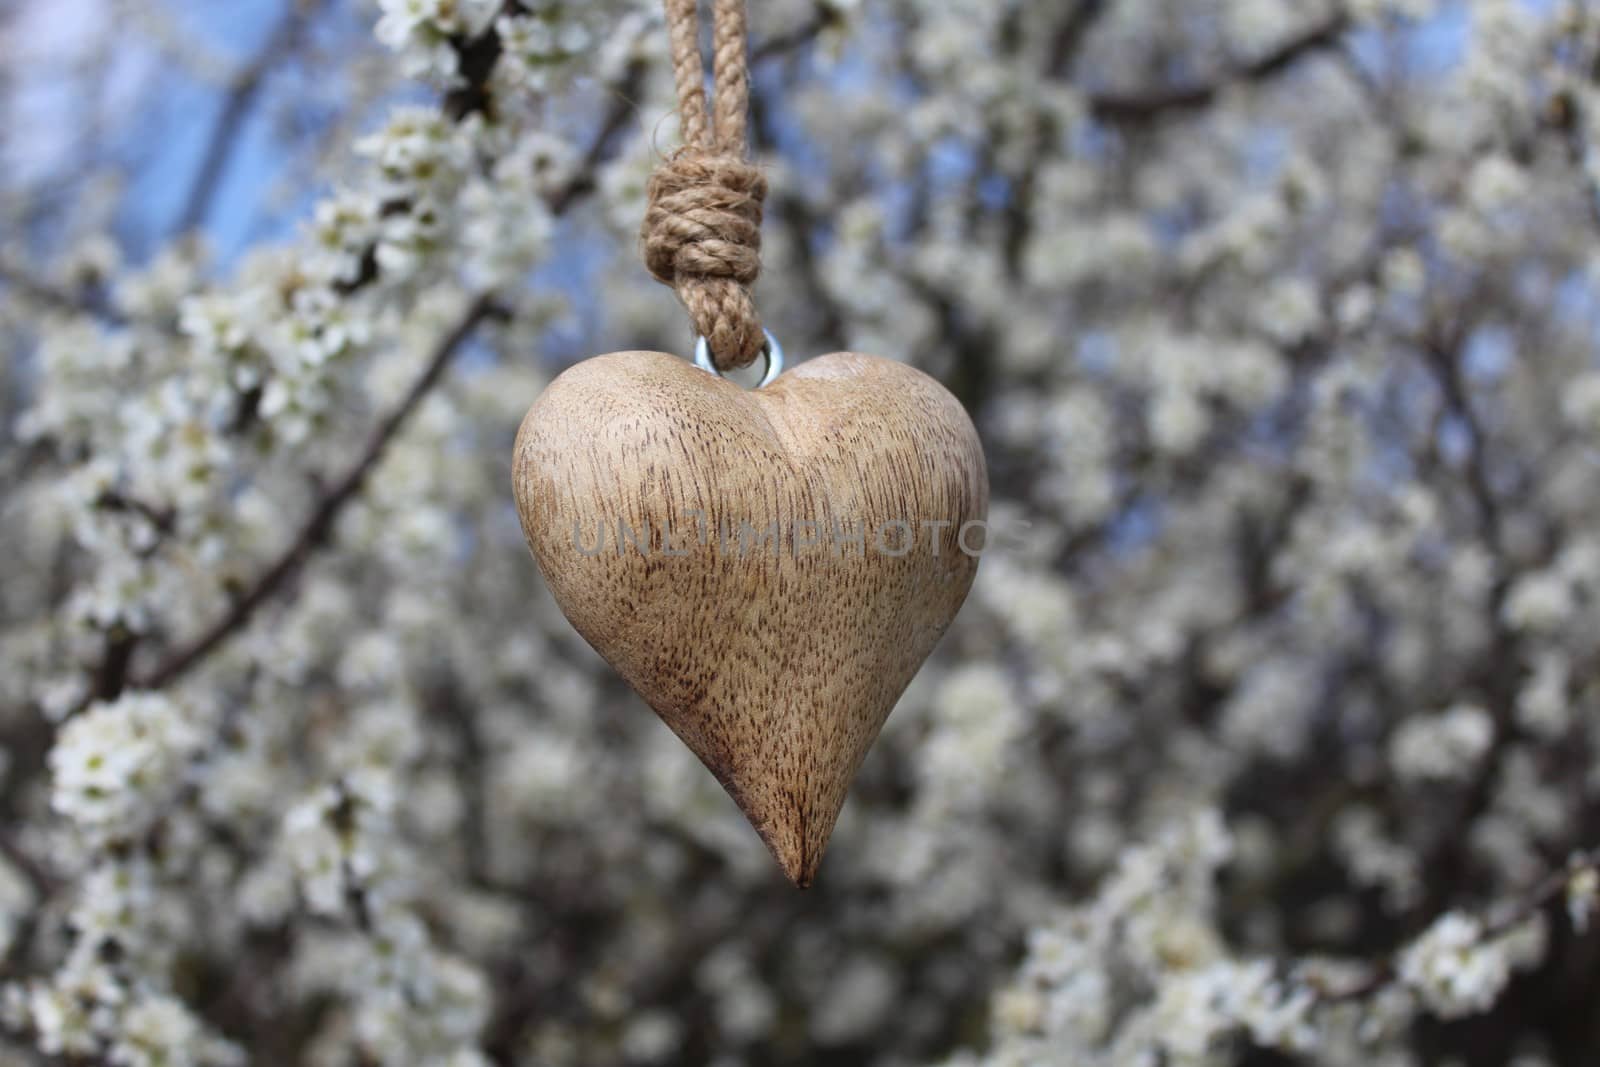 The picture shows a wooden heart in a blossoming bush